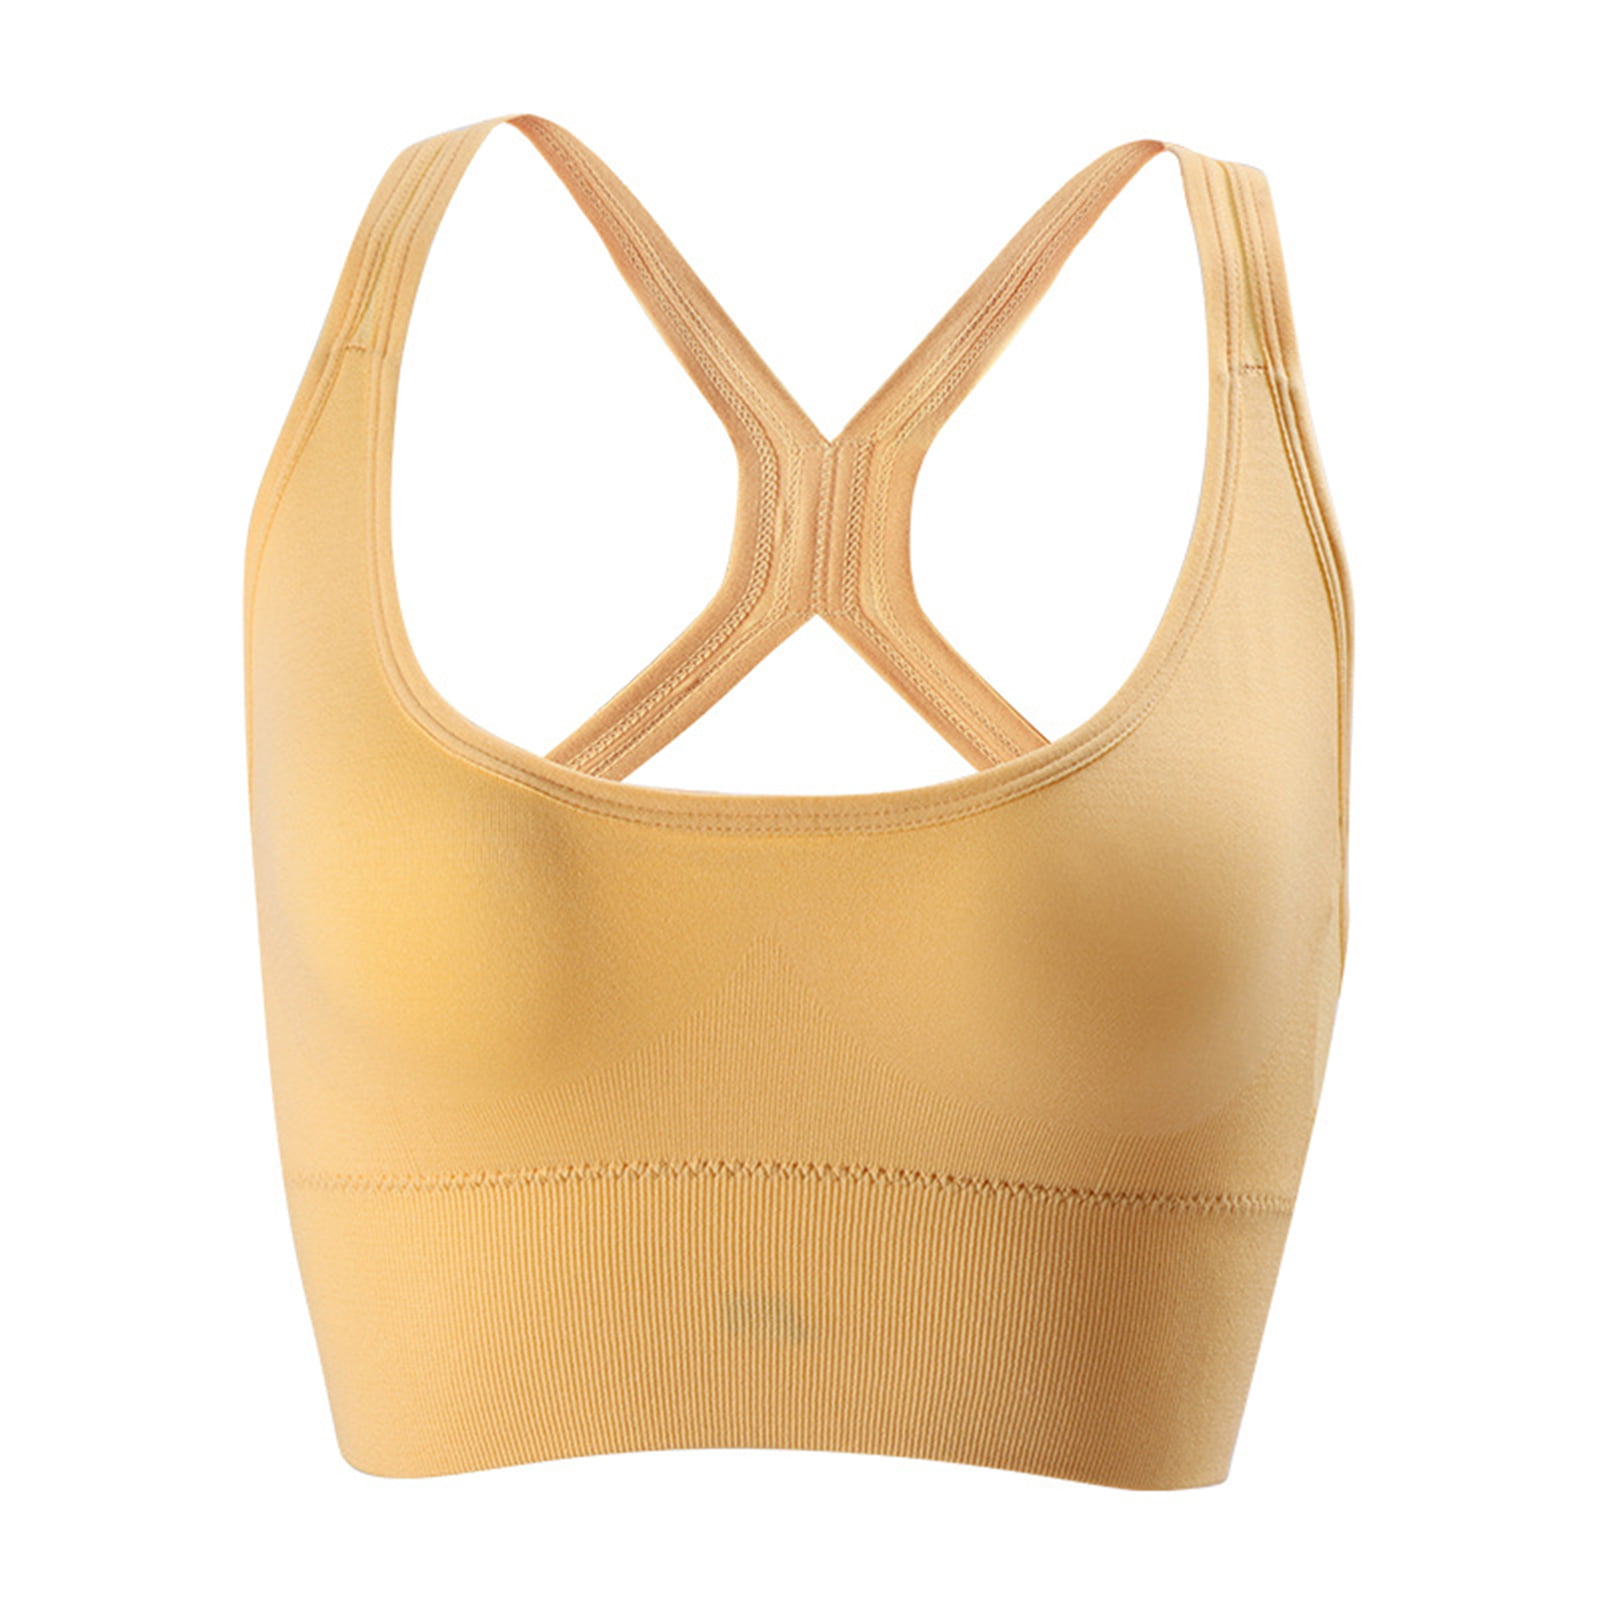 harmtty Sports Bra Solid Color Breathable Stretchy Padded Intimacy